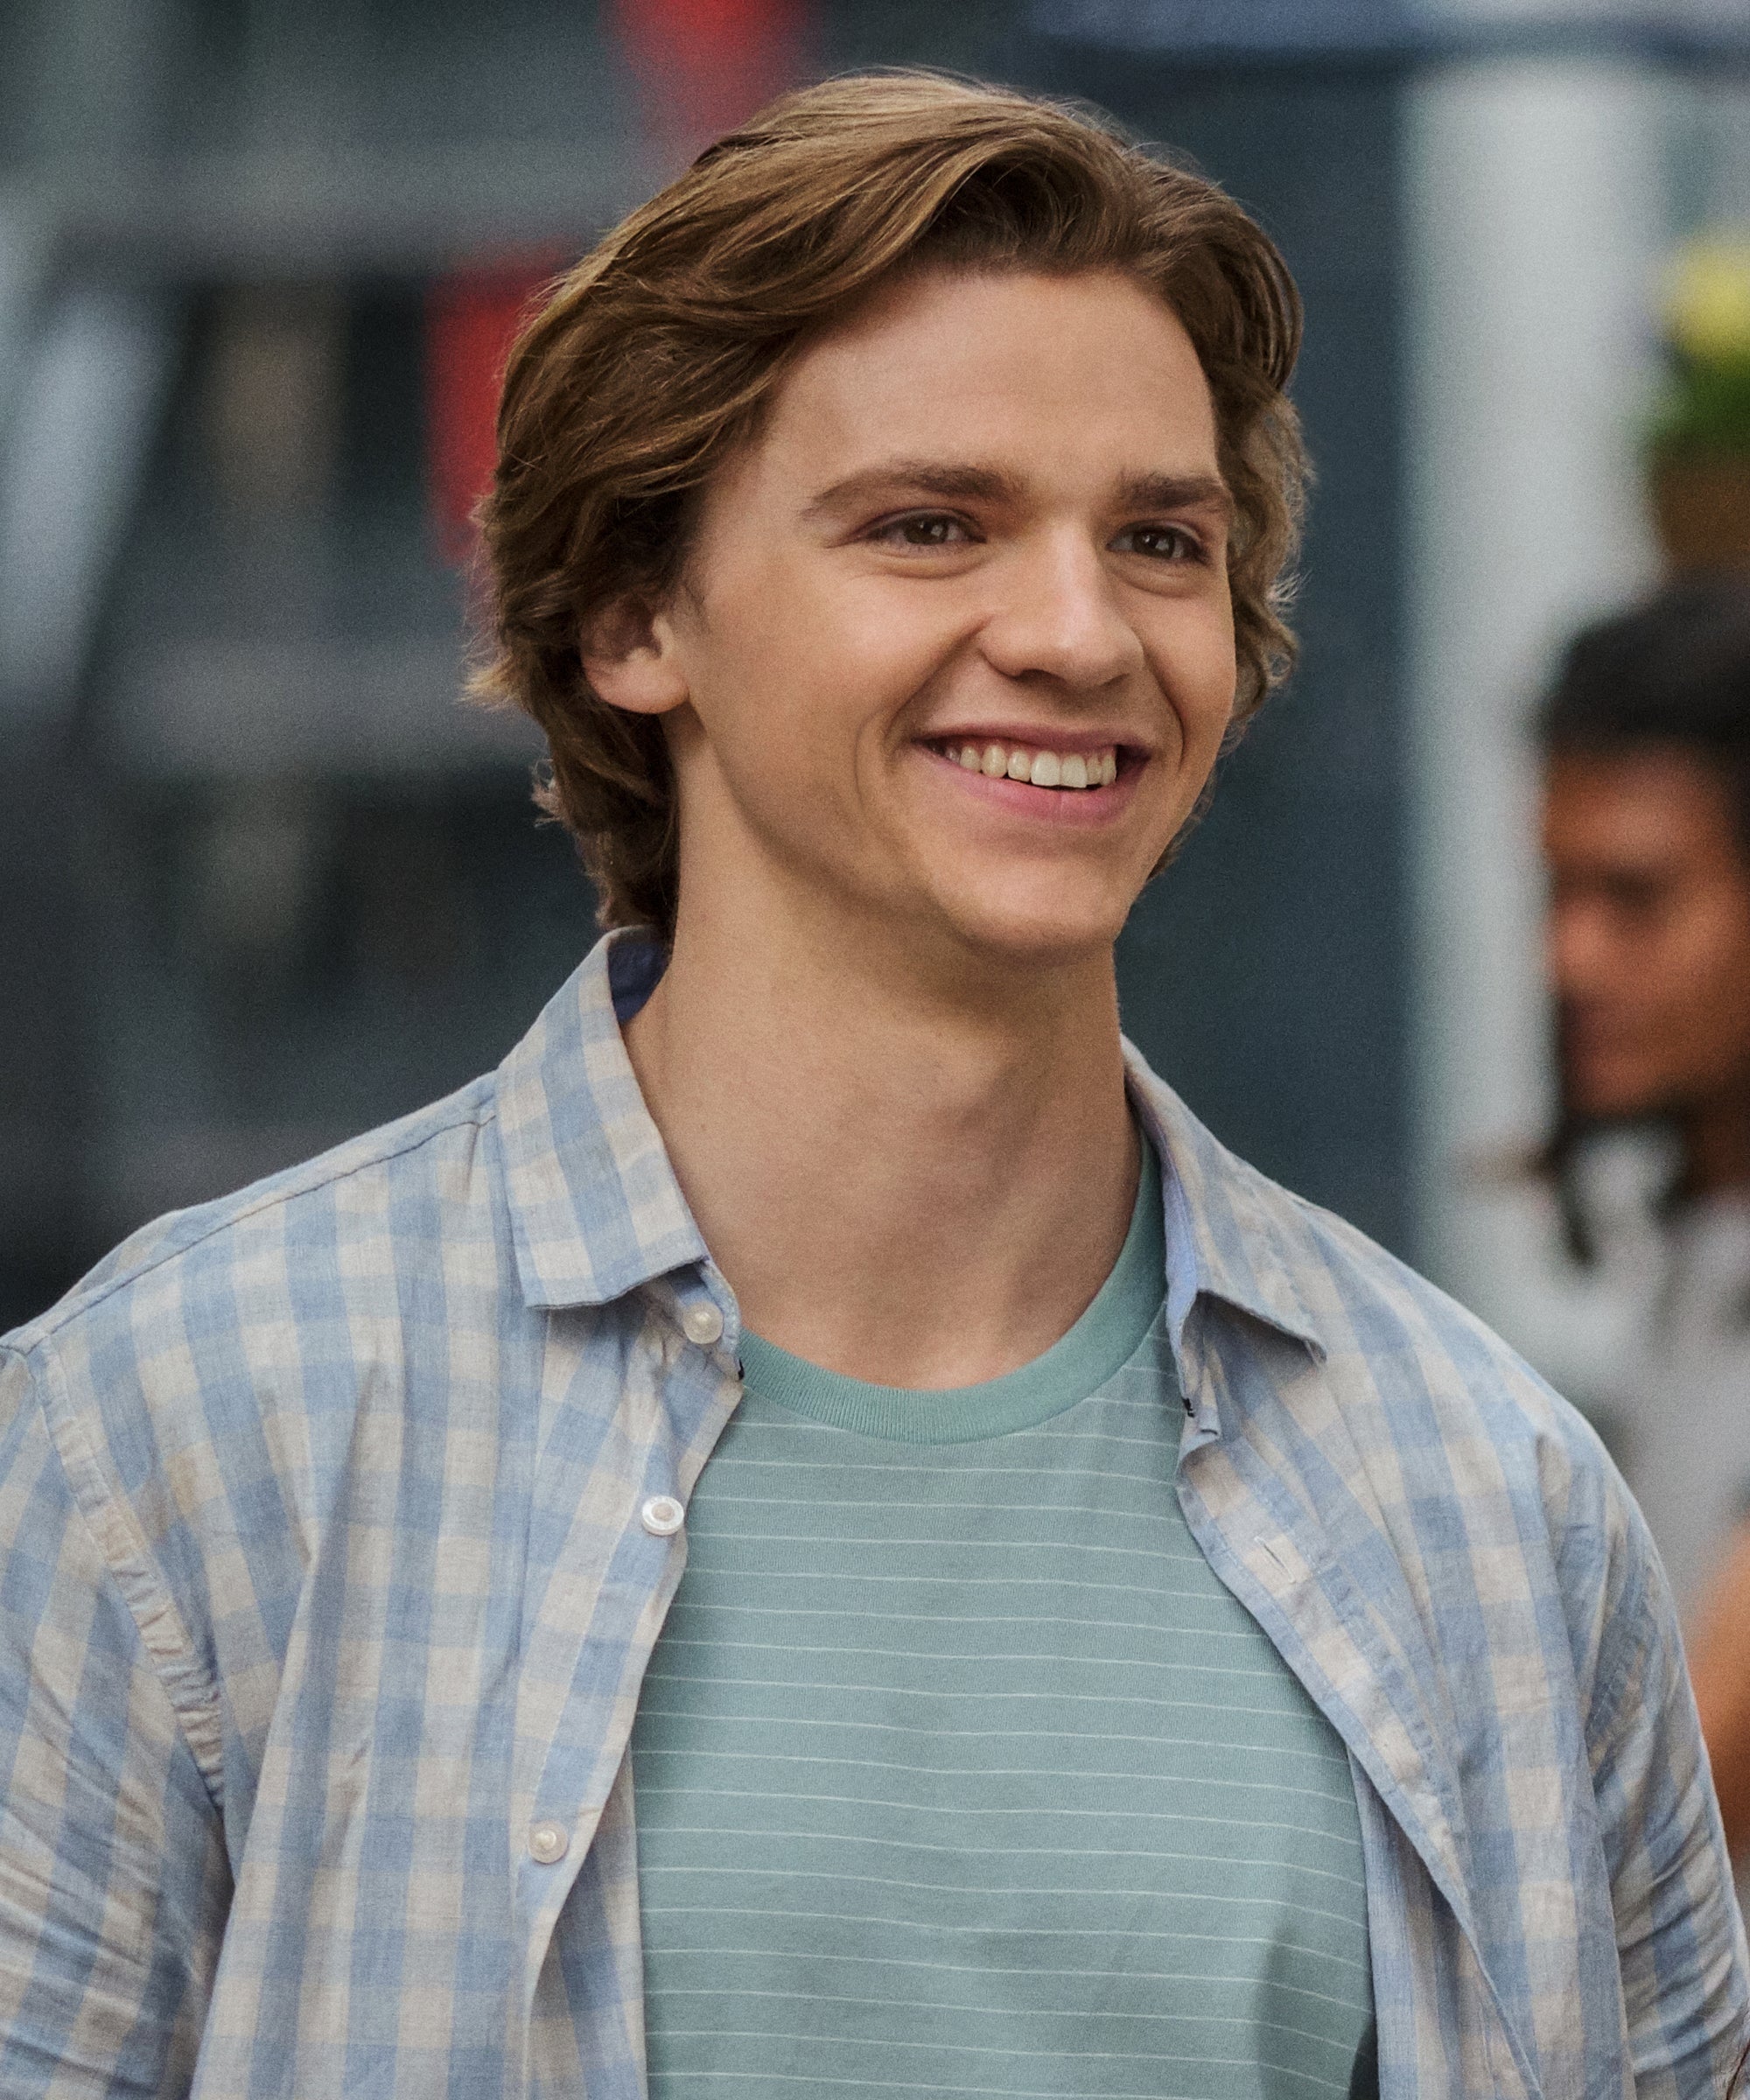 Lee Flynn, The Kissing Booth Wiki